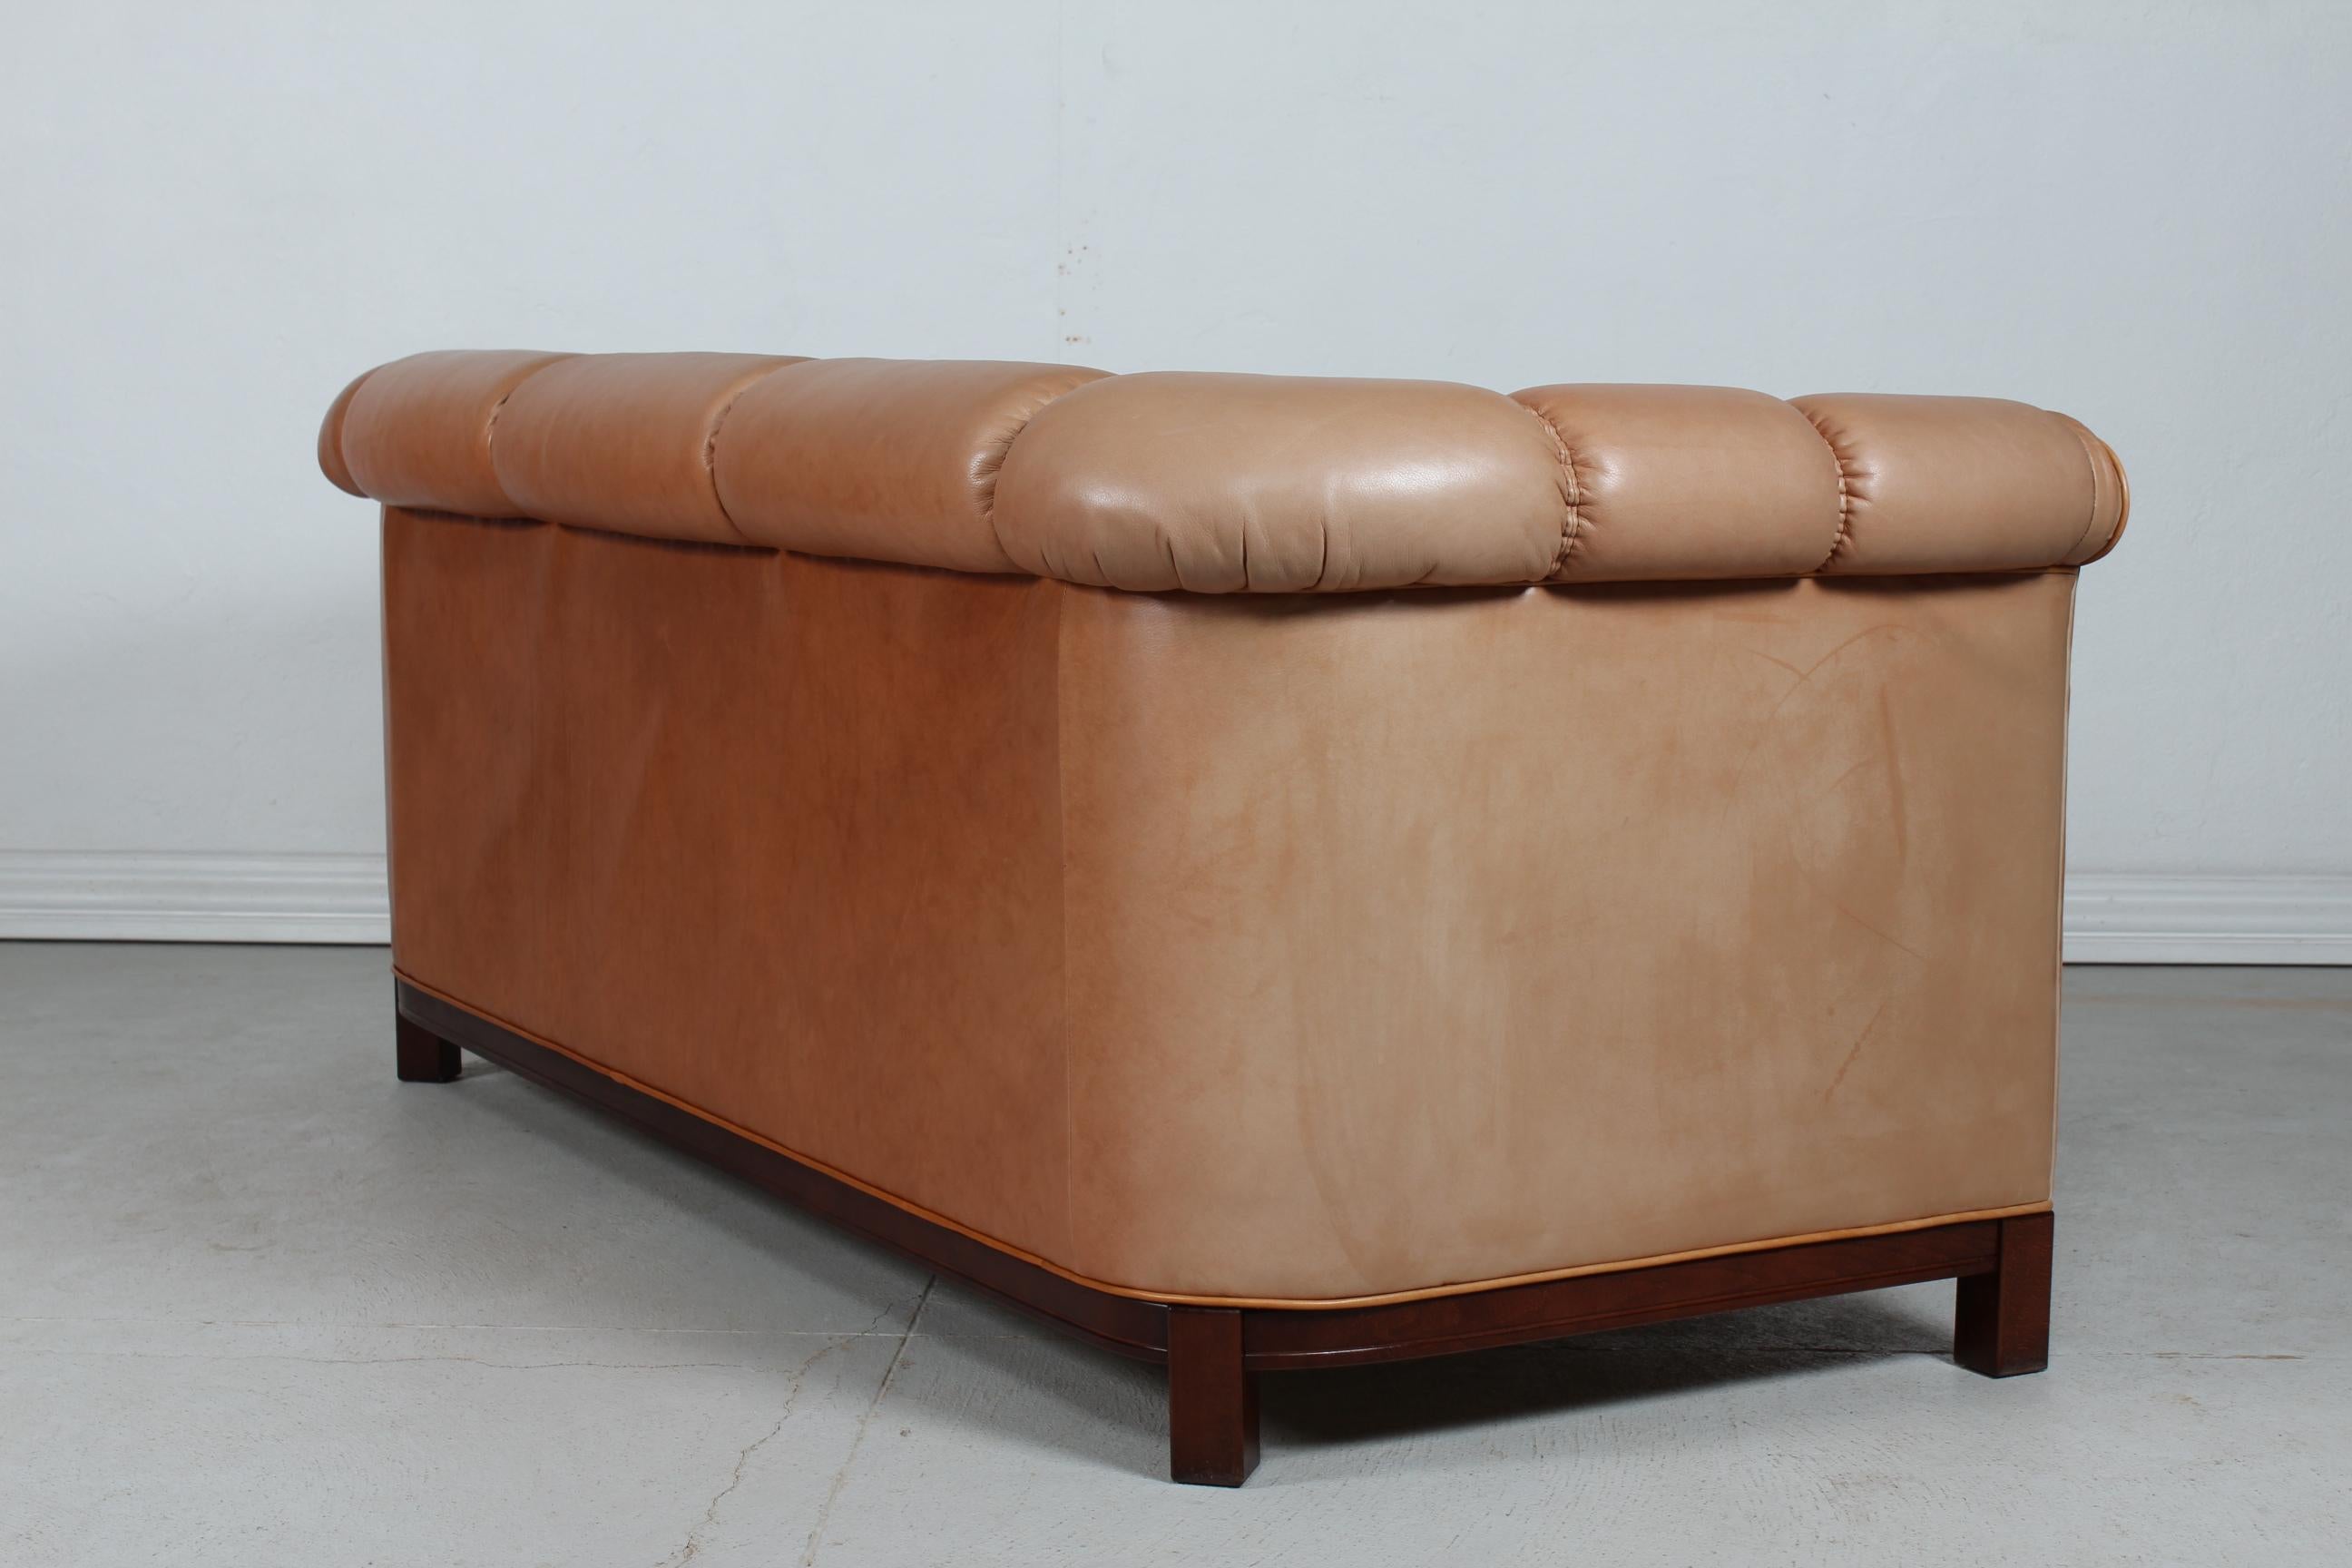 Vintage Chesterfield Sofa and Couch Cognac Leather and Mahogany Frame, 1970s For Sale 2